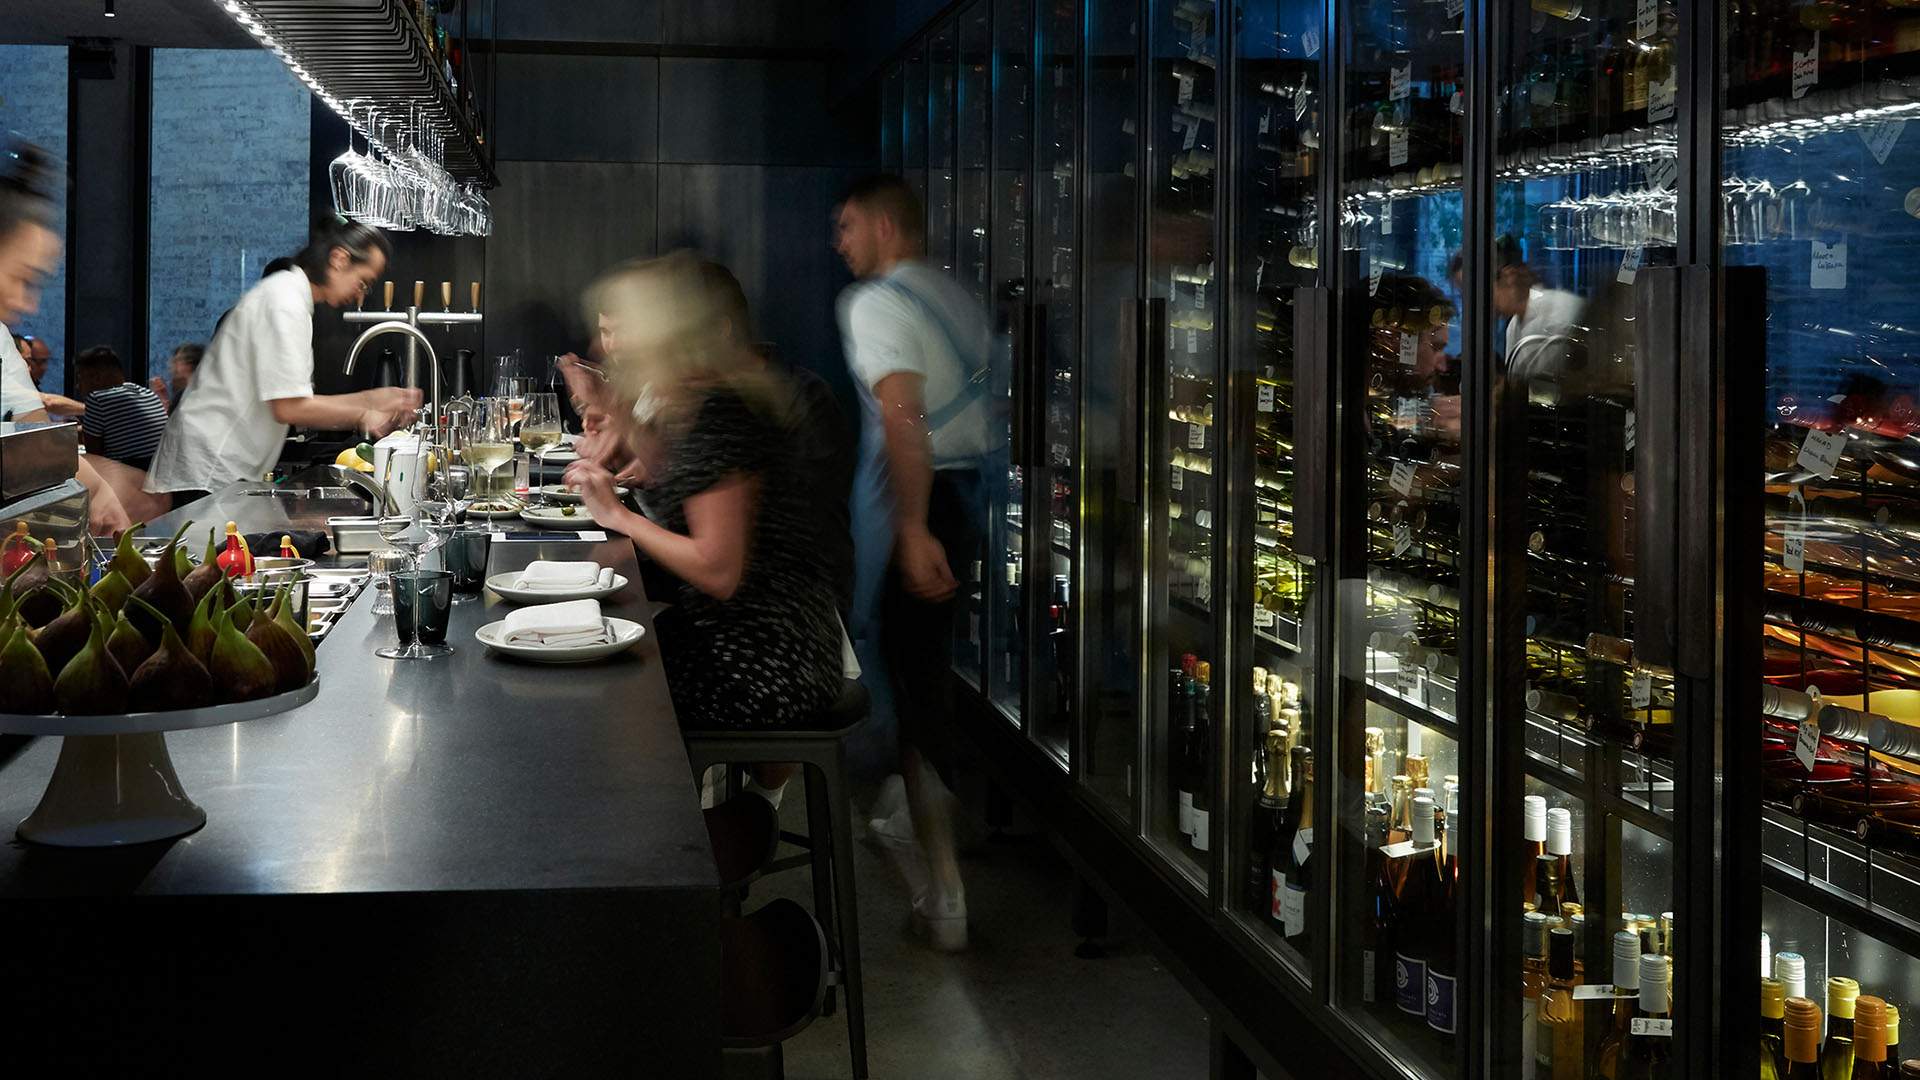 Now Open: NOMAD's New Multi-Faceted Venue Beau Has Welcomed Its Sleek Wine Bar